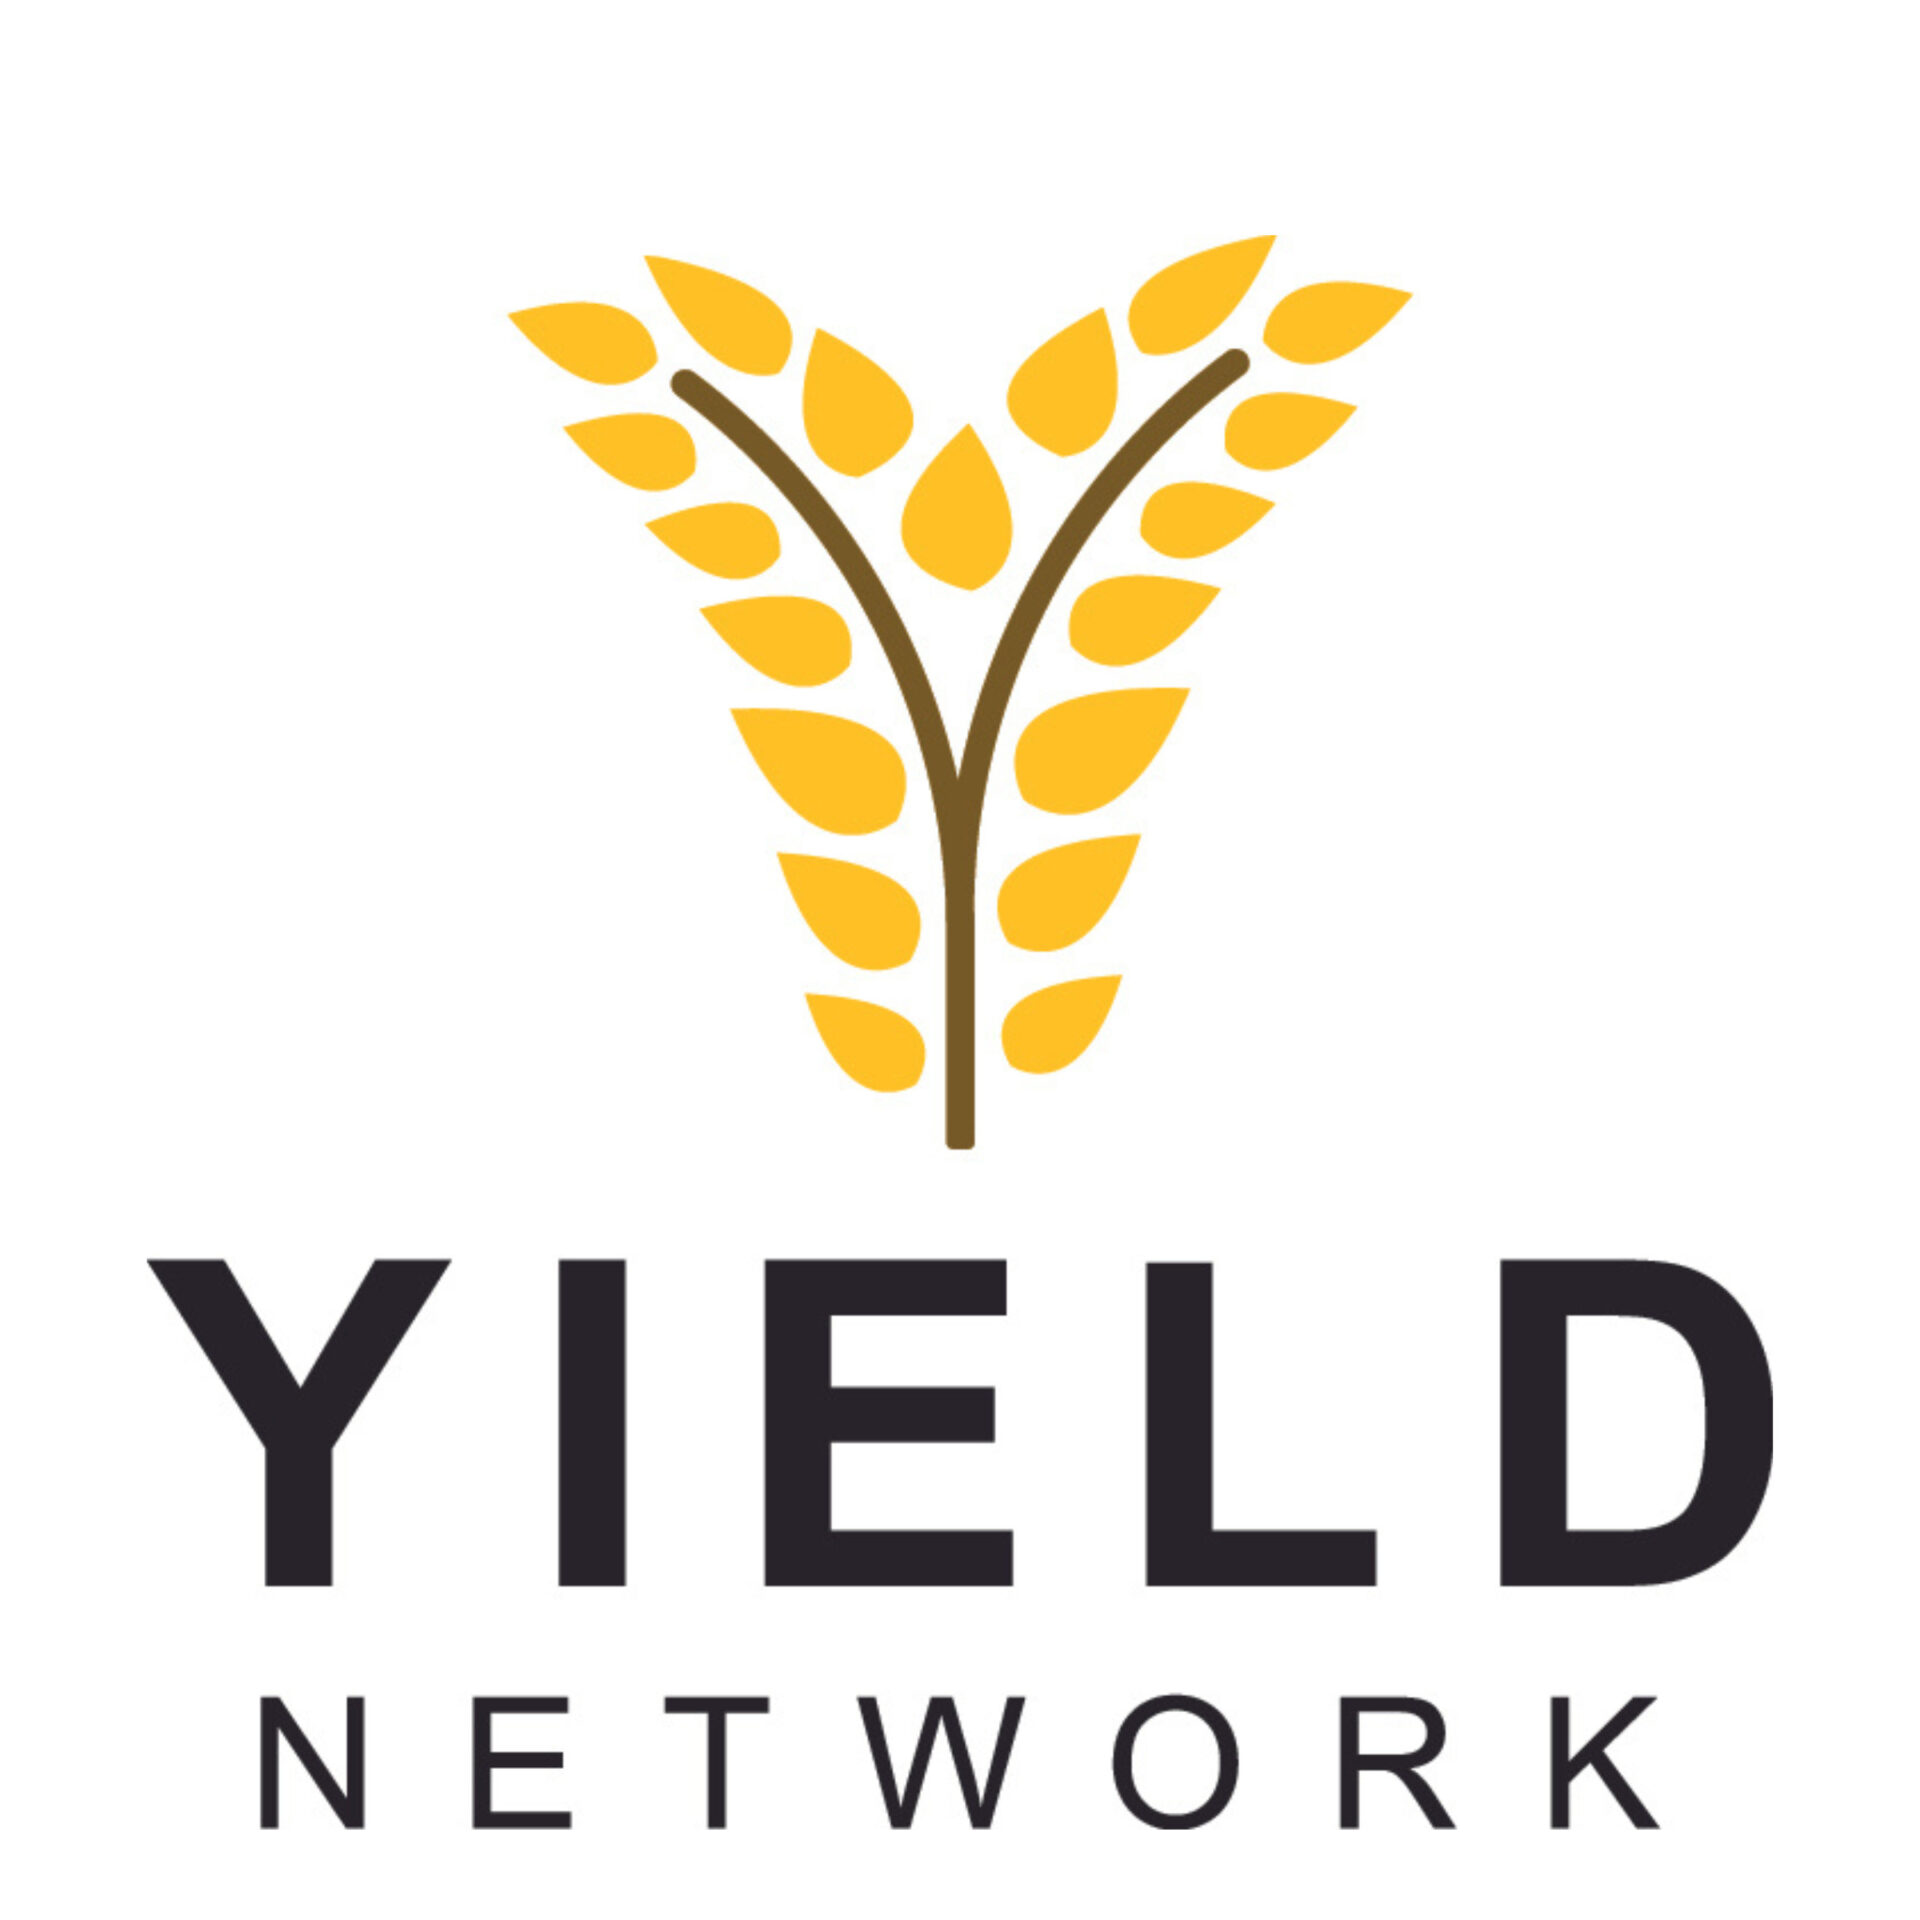 The Yield Network